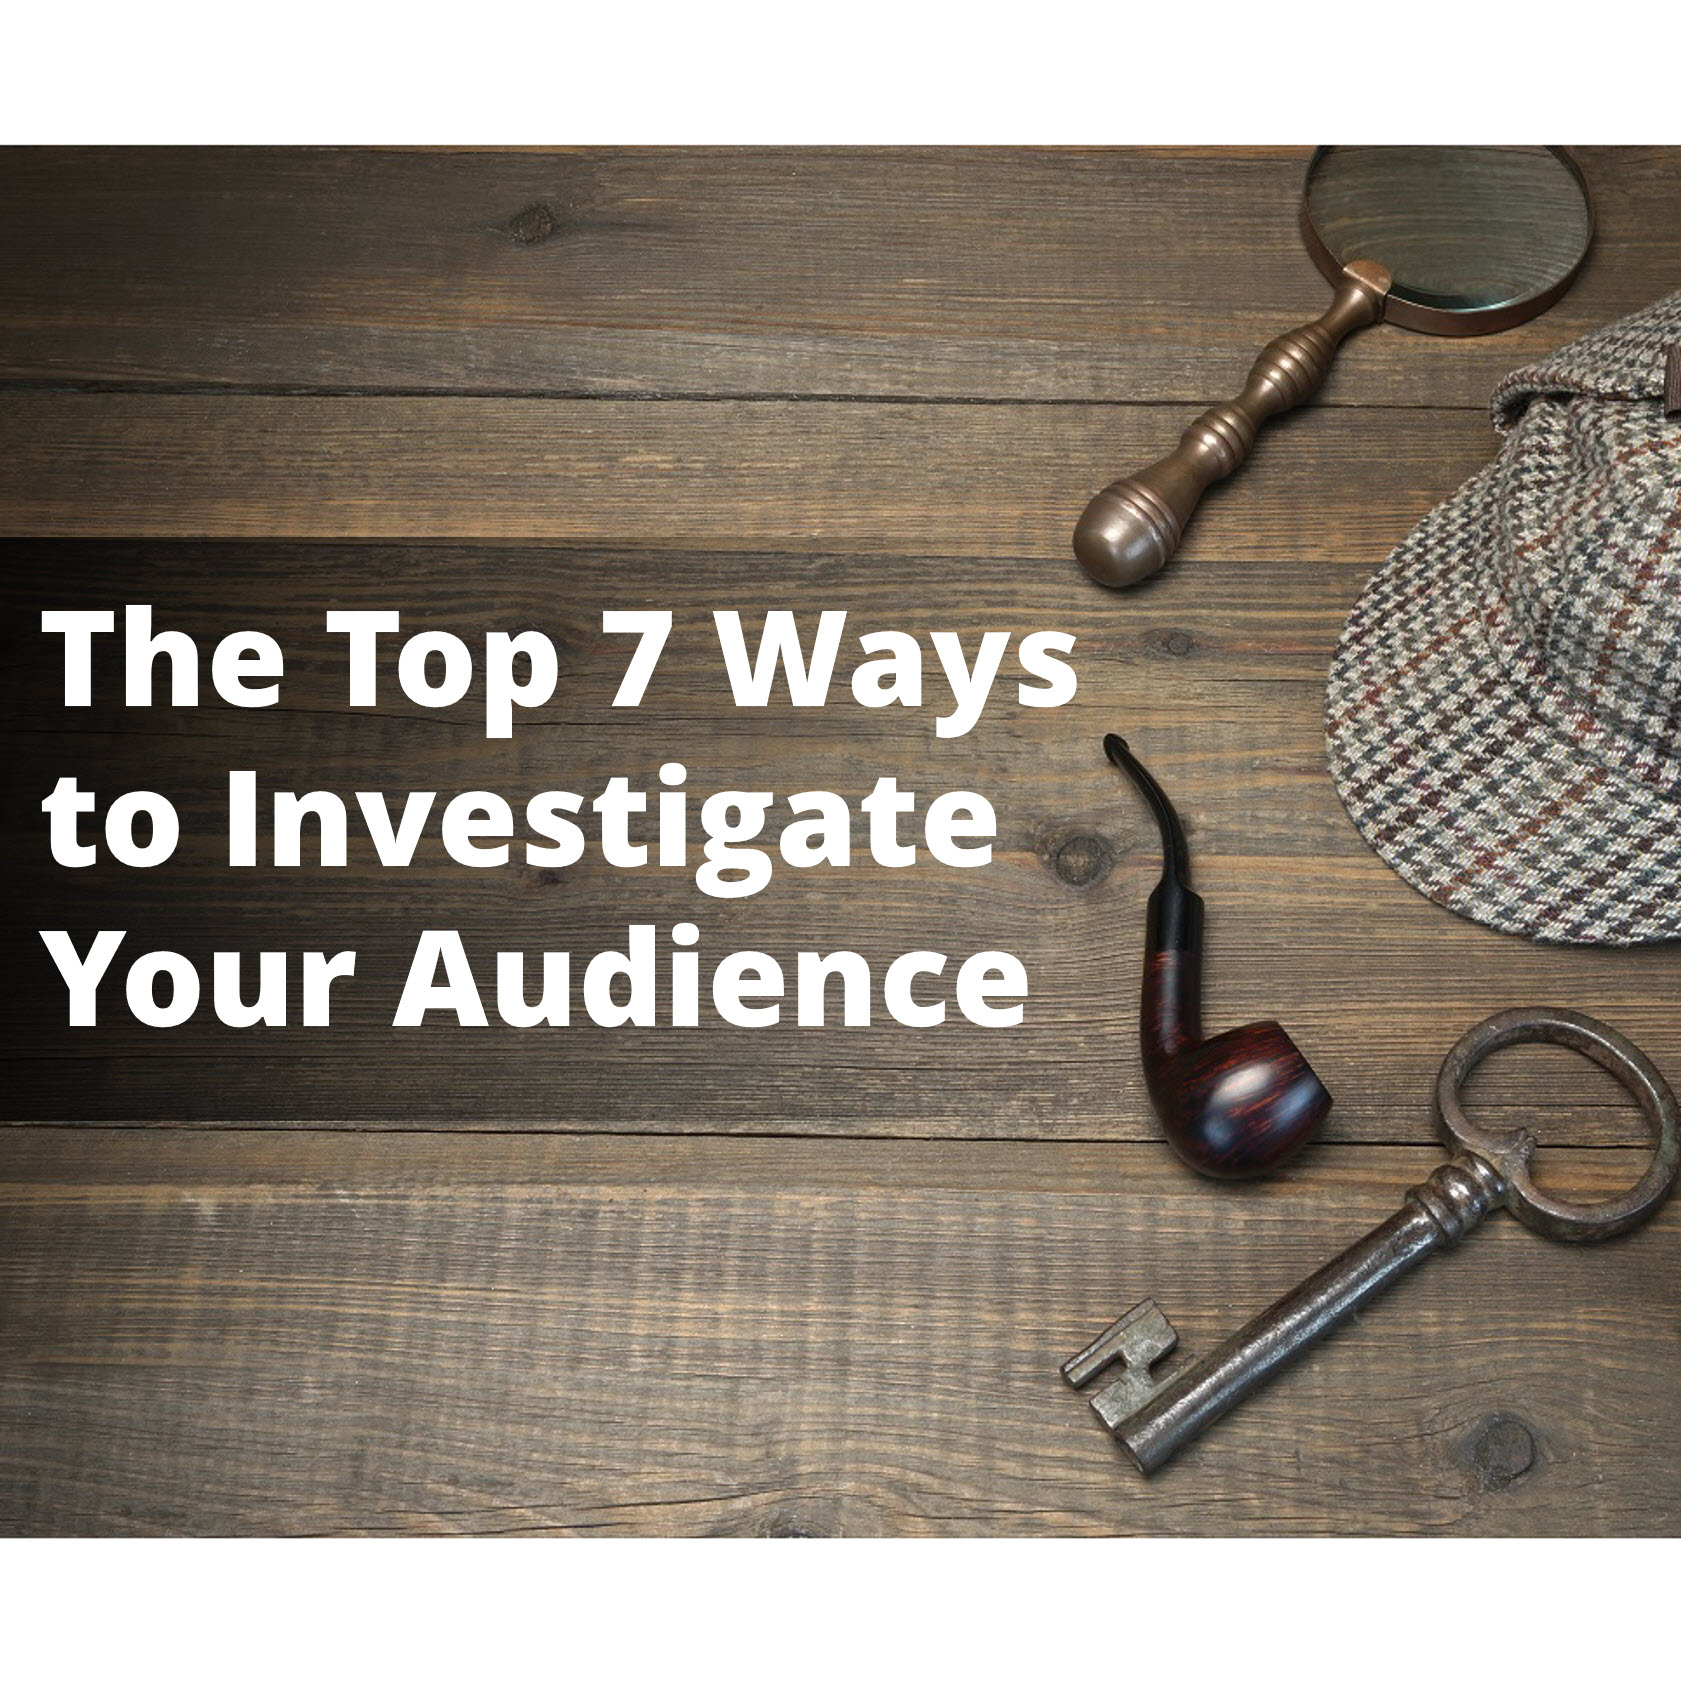 The Top 7 Ways to Investigate Your Audience